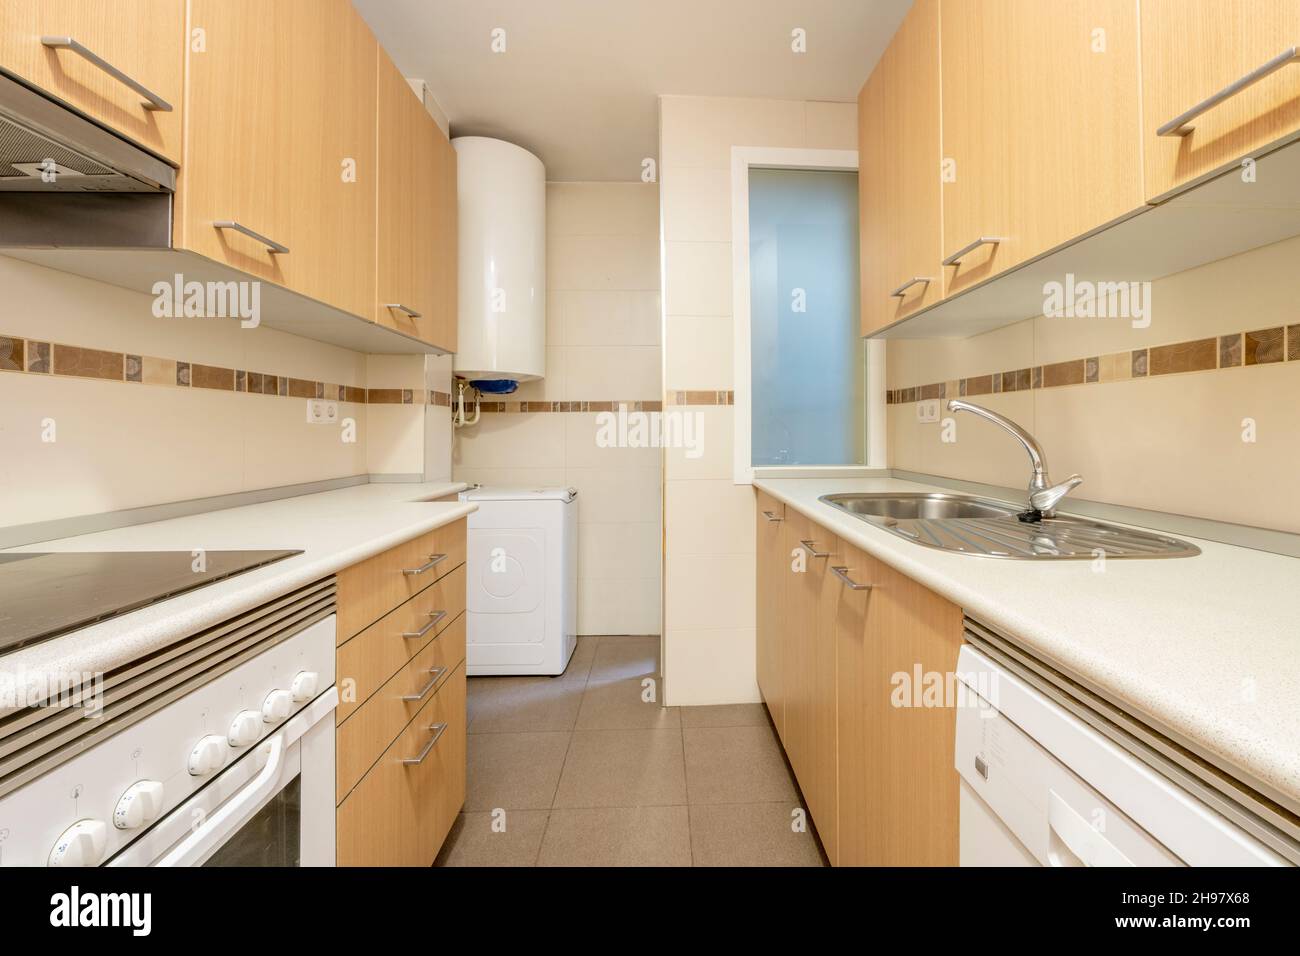 https://c8.alamy.com/comp/2H97X68/kitchen-with-cream-and-oak-cabinets-with-white-appliances-2H97X68.jpg